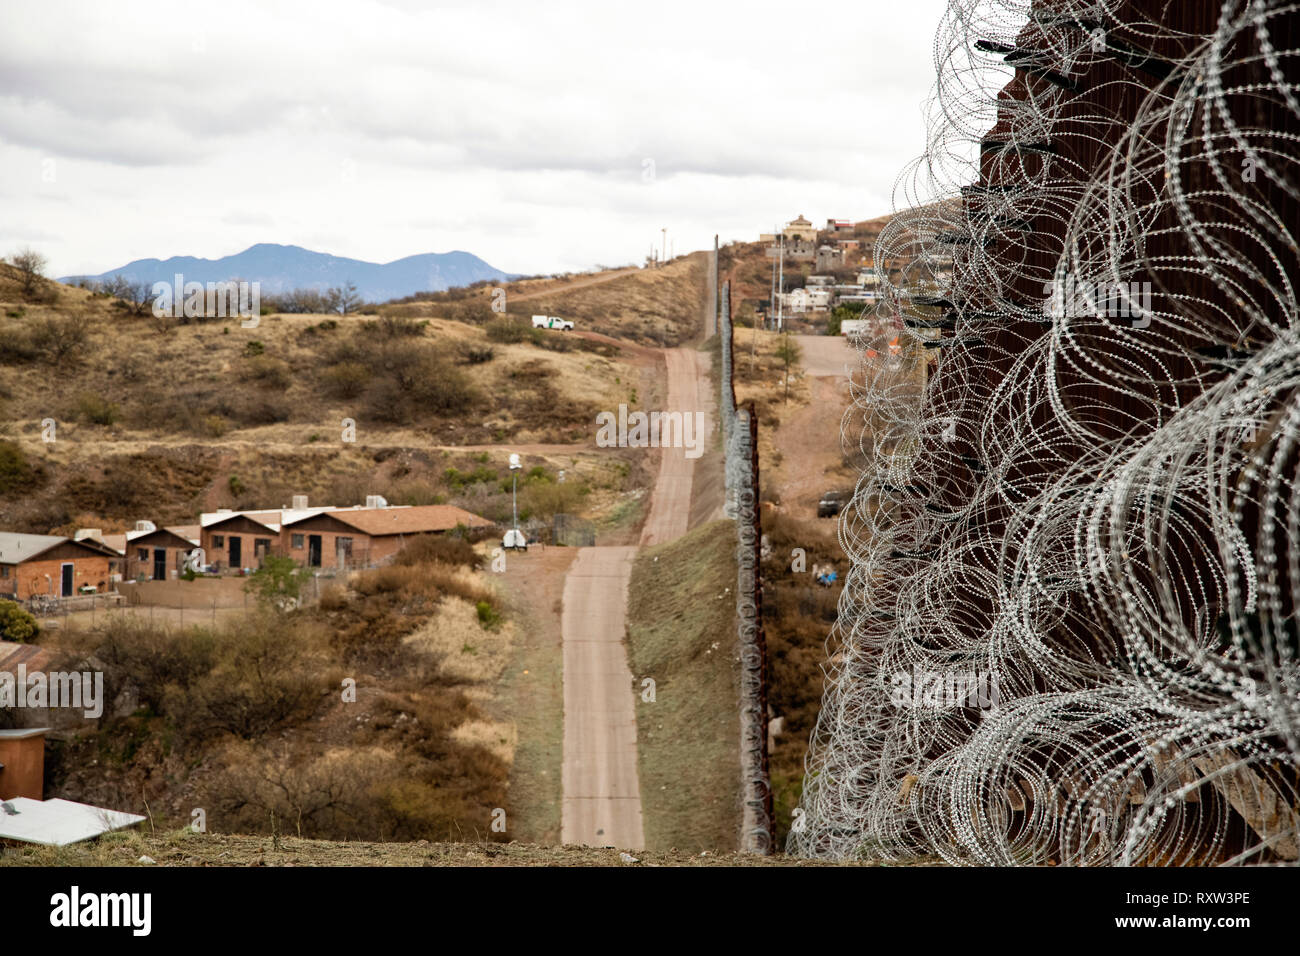 US-Mexico international border: Layers of Concertina are added to existing barrier infrastructure along the U.S. - Mexico border near Nogales, AZ, on February 4, 2019. See more information below. Stock Photo